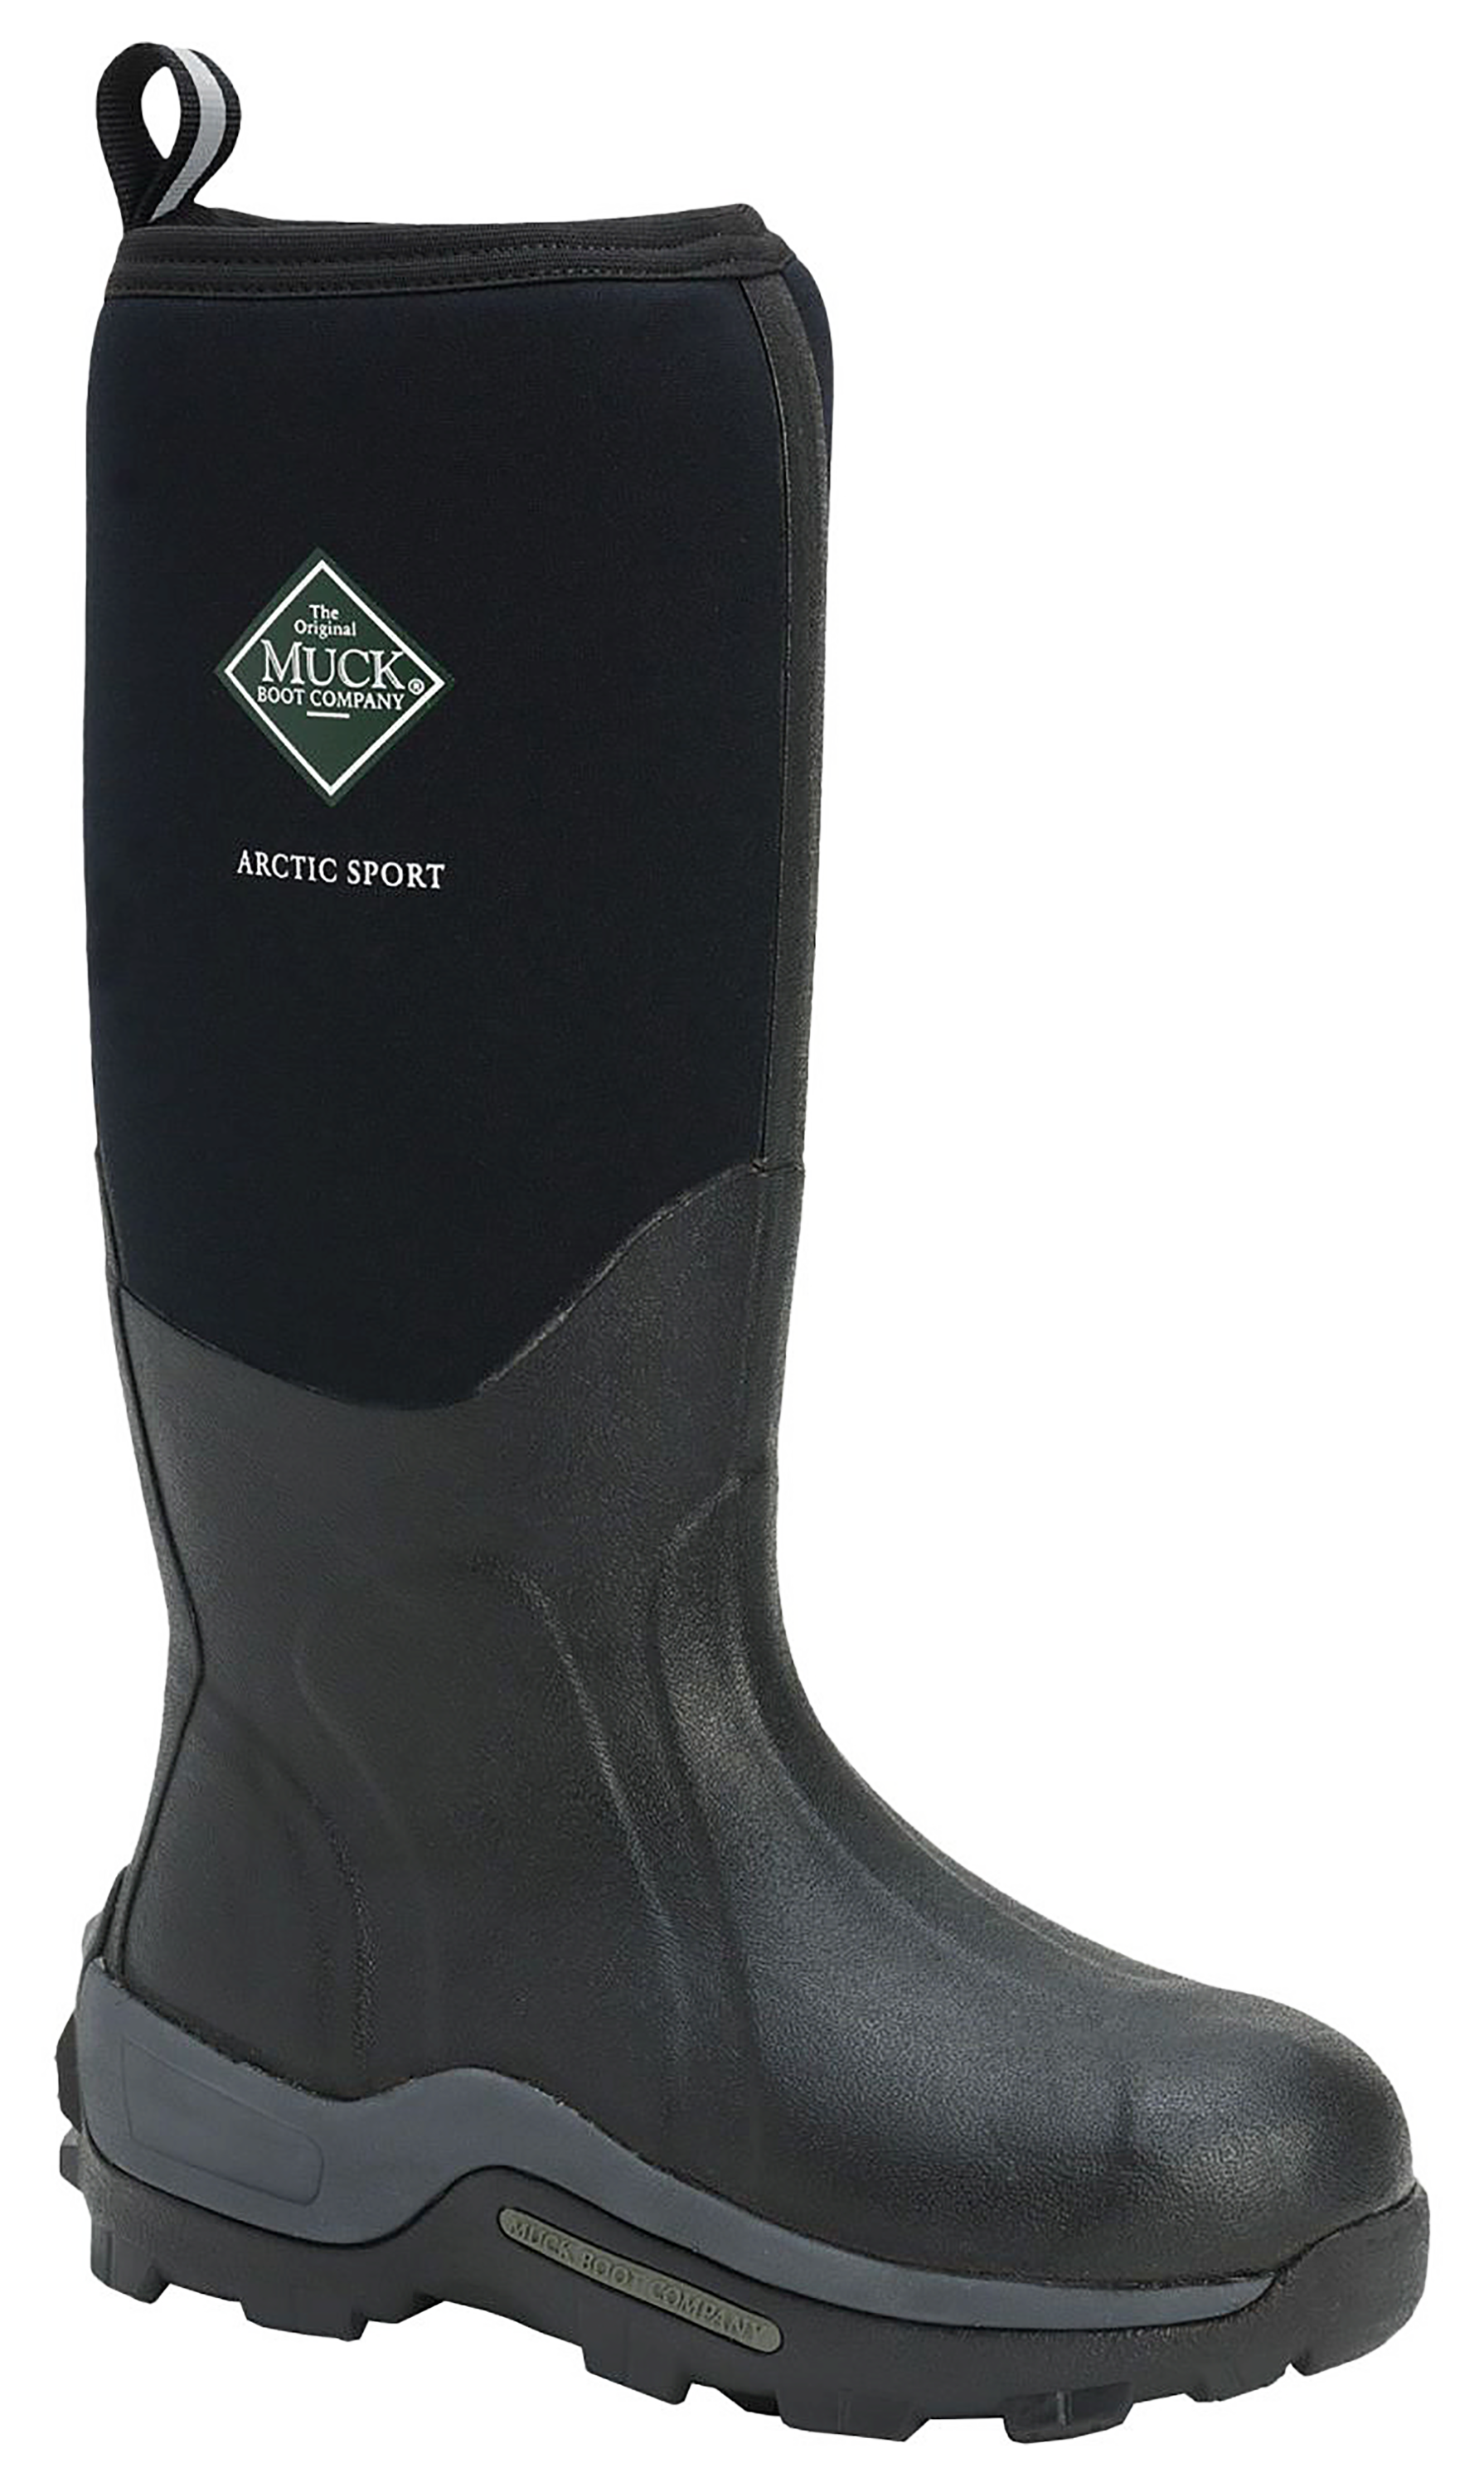 The Original Muck Boot Company Arctic Sport Tall Rubber Boots for